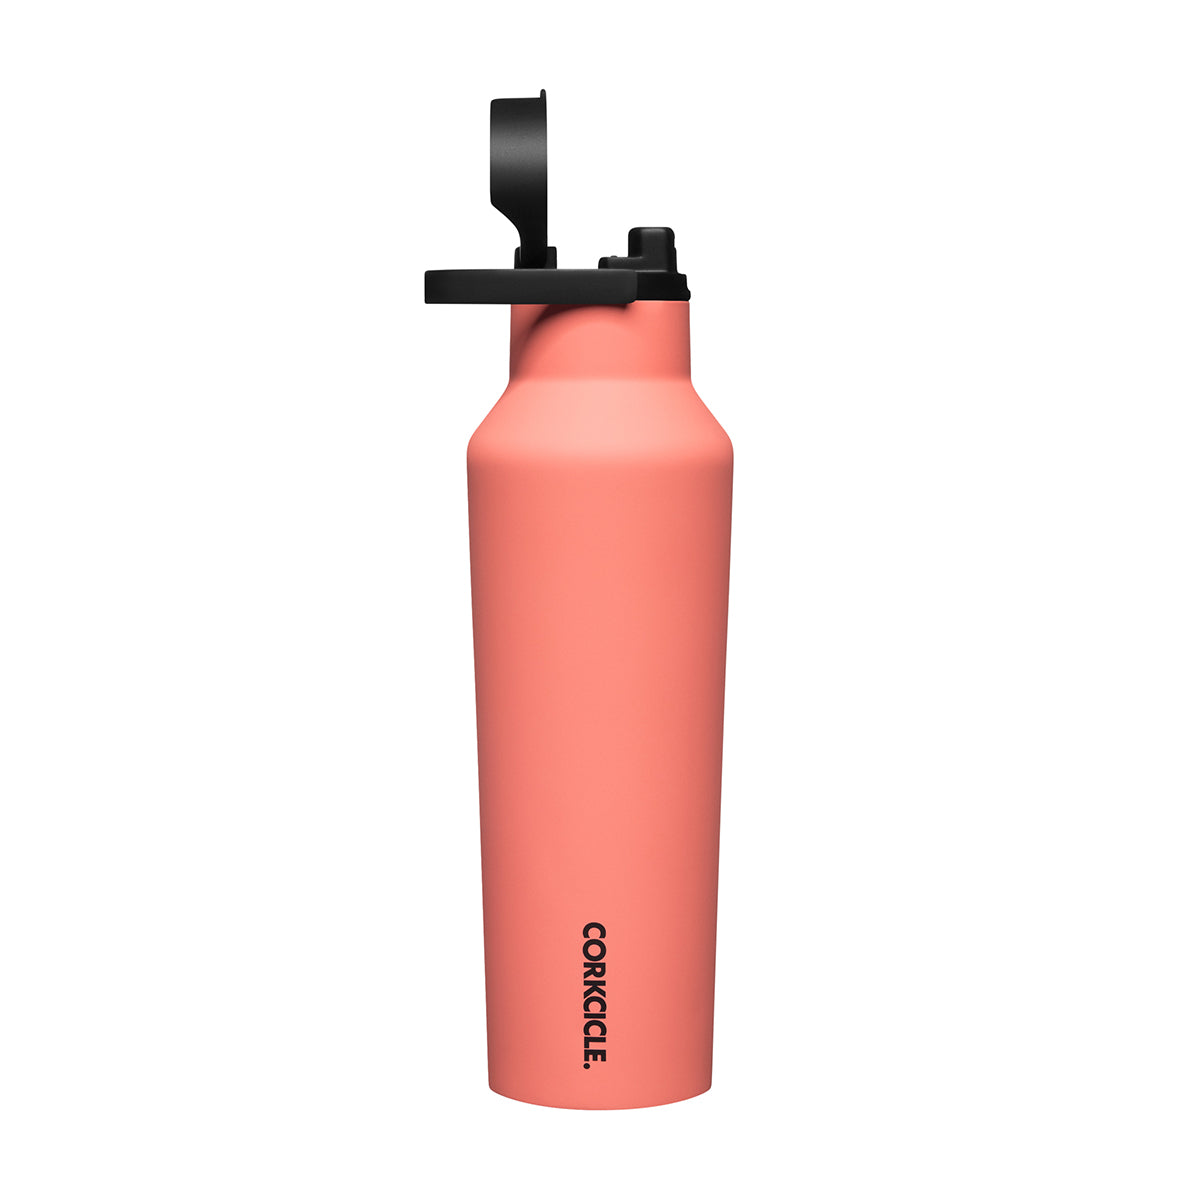 Series A Sports Canteen 600ml - Neon Lights Coral